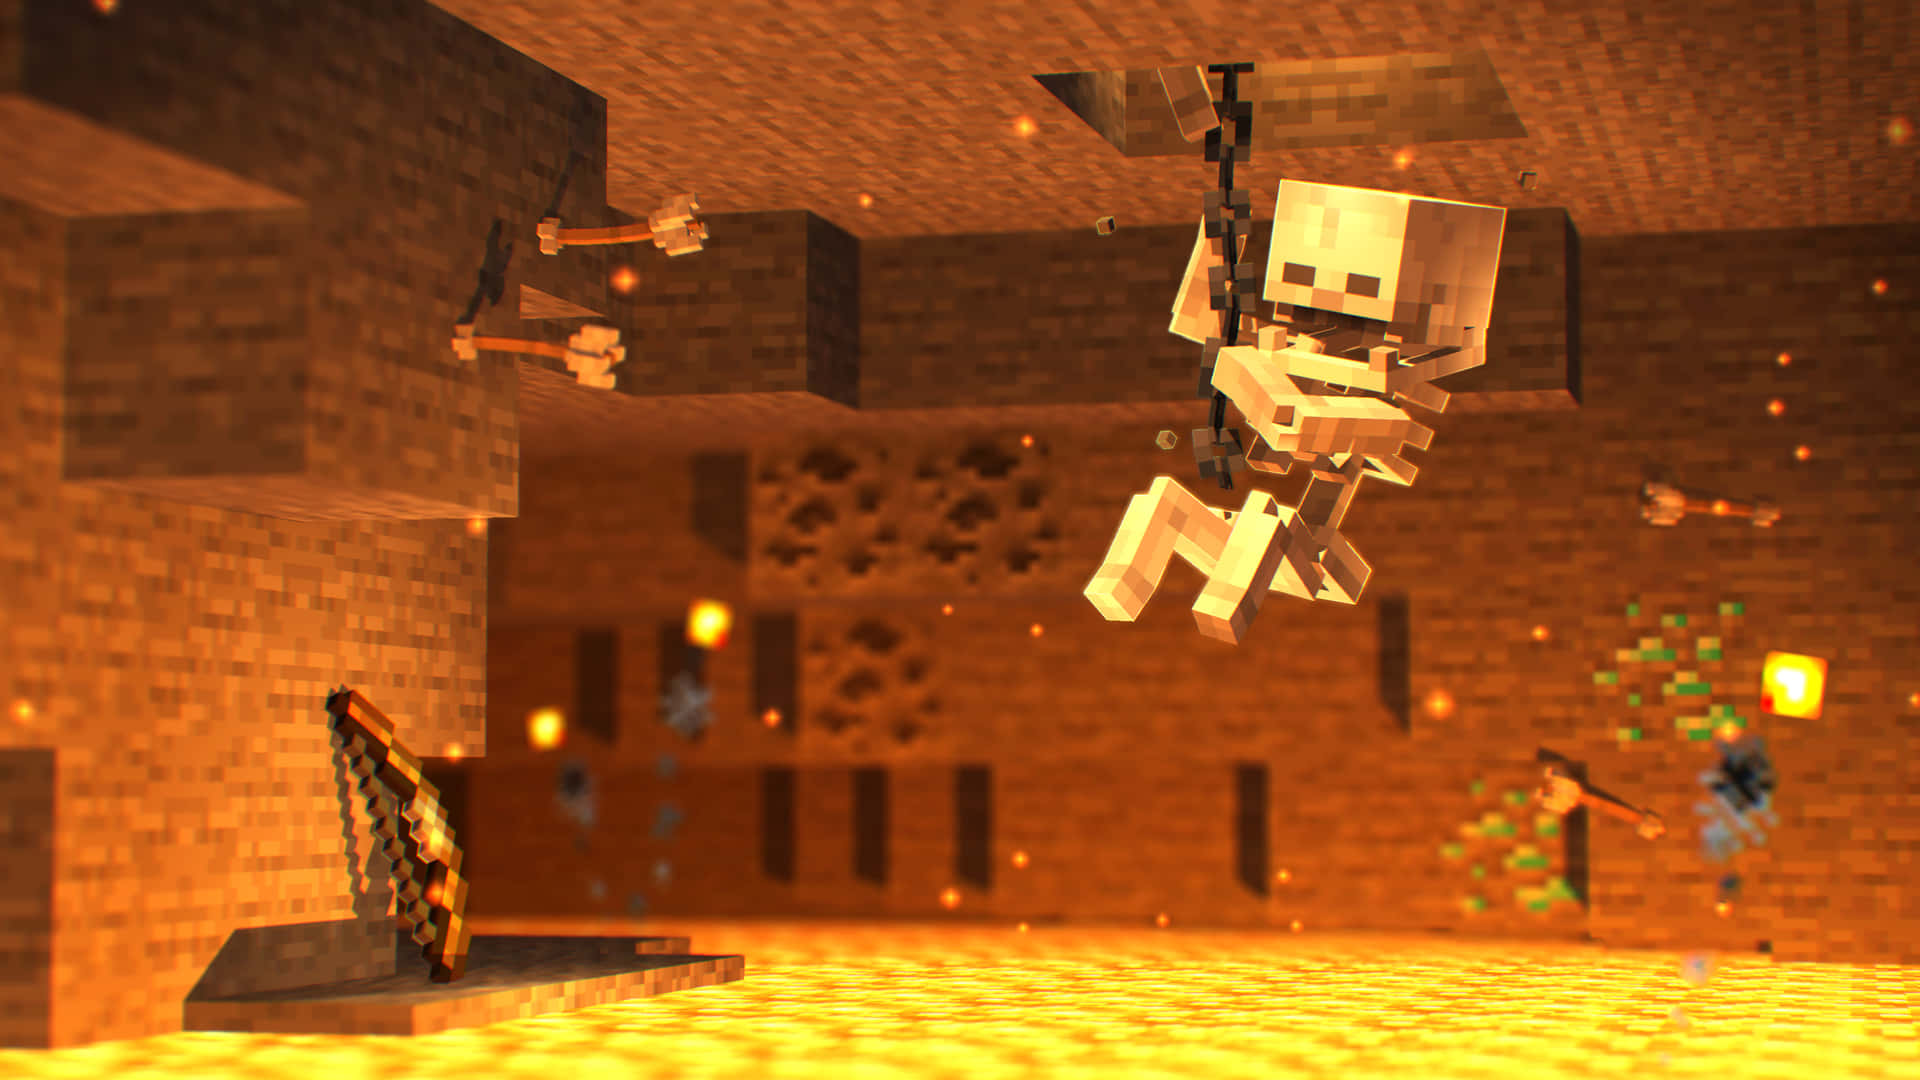 The Mighty Minecraft Skeleton in Action Wallpaper